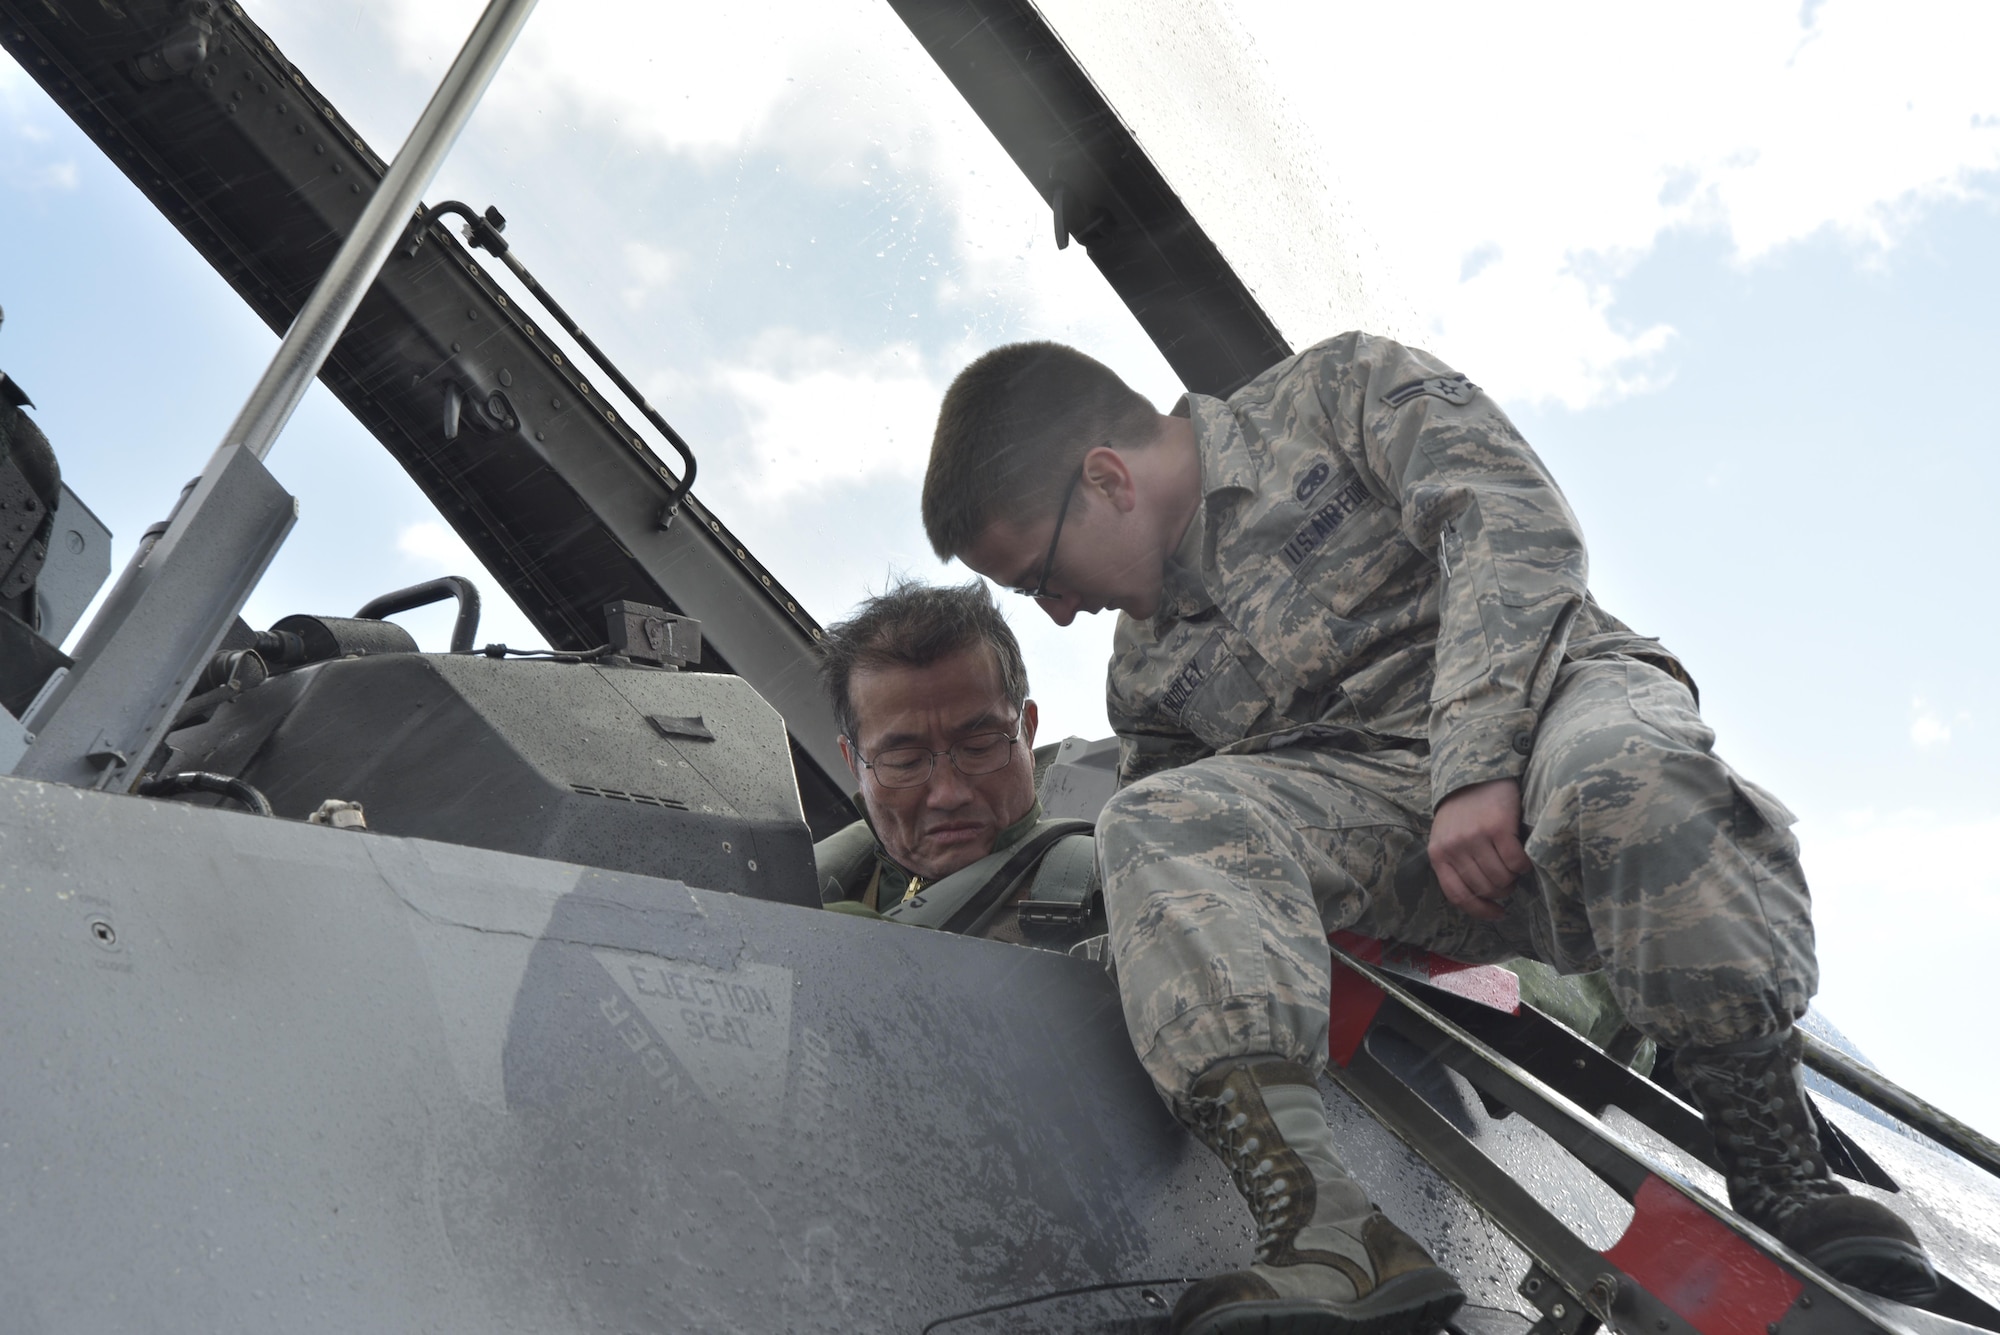 Airman 1st Class Jacob Dudley, a 35th Aircraft Maintenance Squadron crew chief, secures a strap on a seat for Japan Air Self-Defense Force Lt. Gen. Yoshiyuki Sugiyama, Air Defense Command commander, at Misawa Air Base, Japan, Oct. 14, 2015. Sugiyama was preparing to fly in an F-16 Fighting Falcon as part of a bilateral exchange flight with the 13th Fighter Squadron. (U.S. Air Force photo/Senior Airman Jose L. Hernandez-Domitilo)